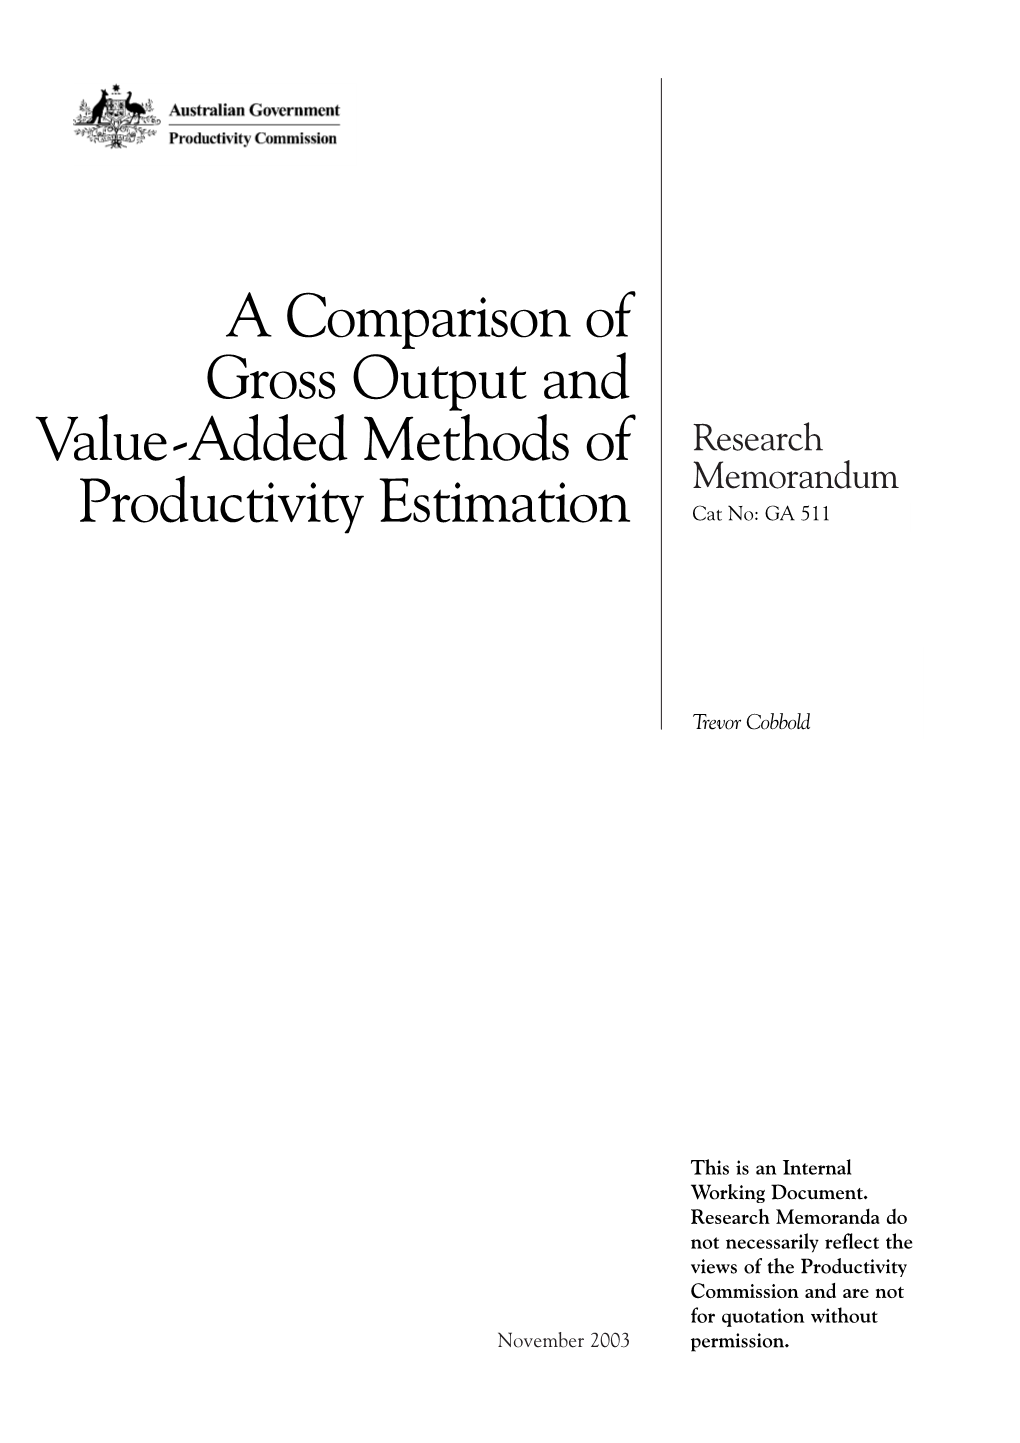 A Comparison of Gross Output and Value-Added Methods of Research Memorandum Productivity Estimation Cat No: GA 511